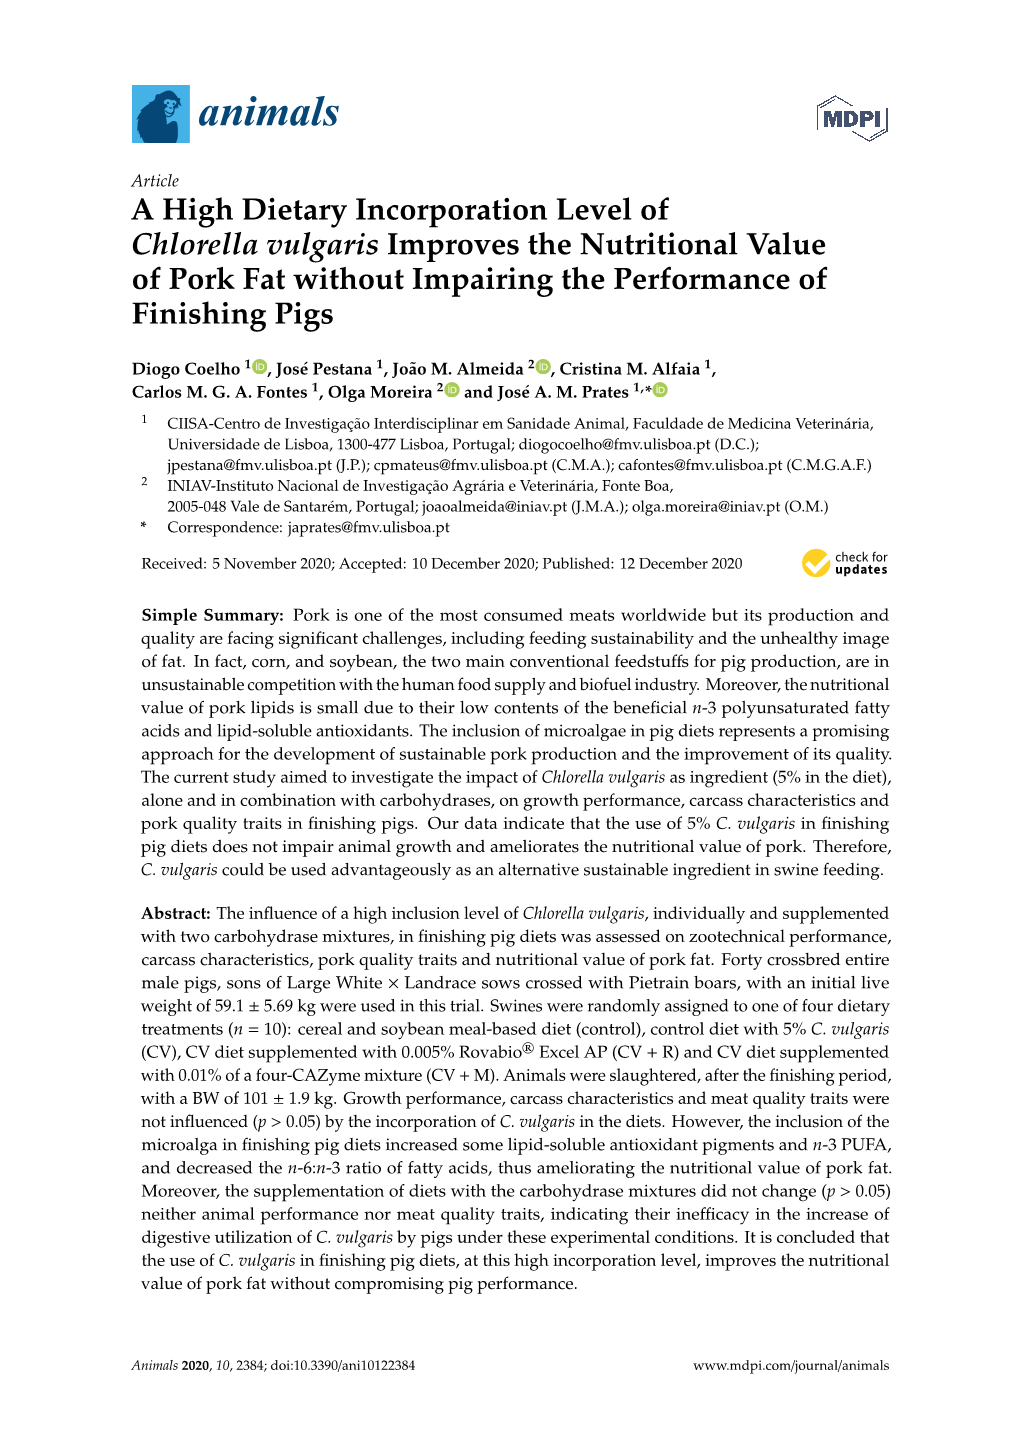 A High Dietary Incorporation Level of Chlorella Vulgaris Improves the Nutritional Value of Pork Fat Without Impairing the Performance of Finishing Pigs